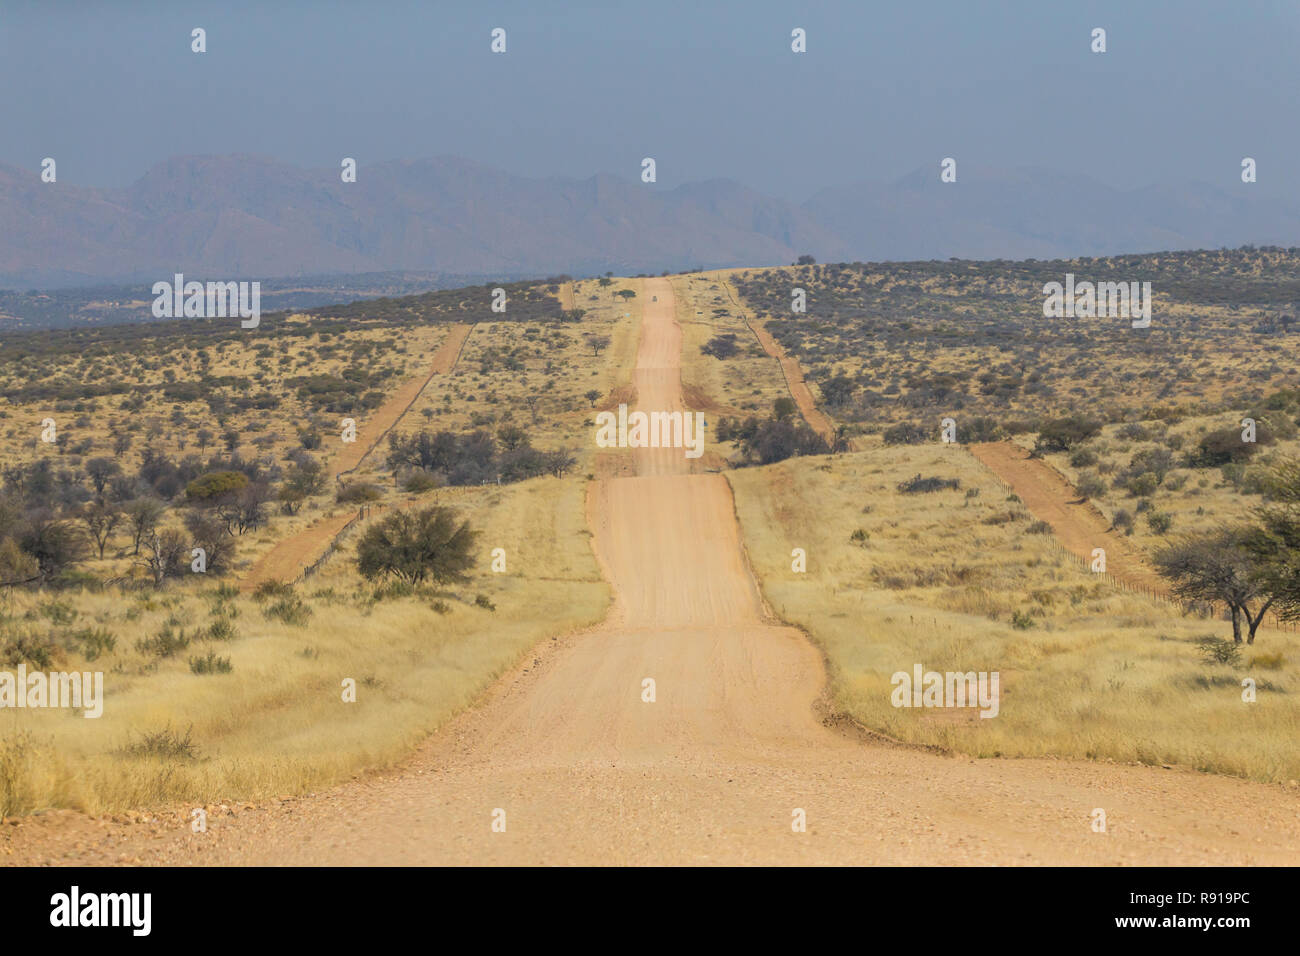 landscape of typical terrain or environment in Namibia Africa, dirt road long and hilly leading straight ahead in remote area Stock Photo